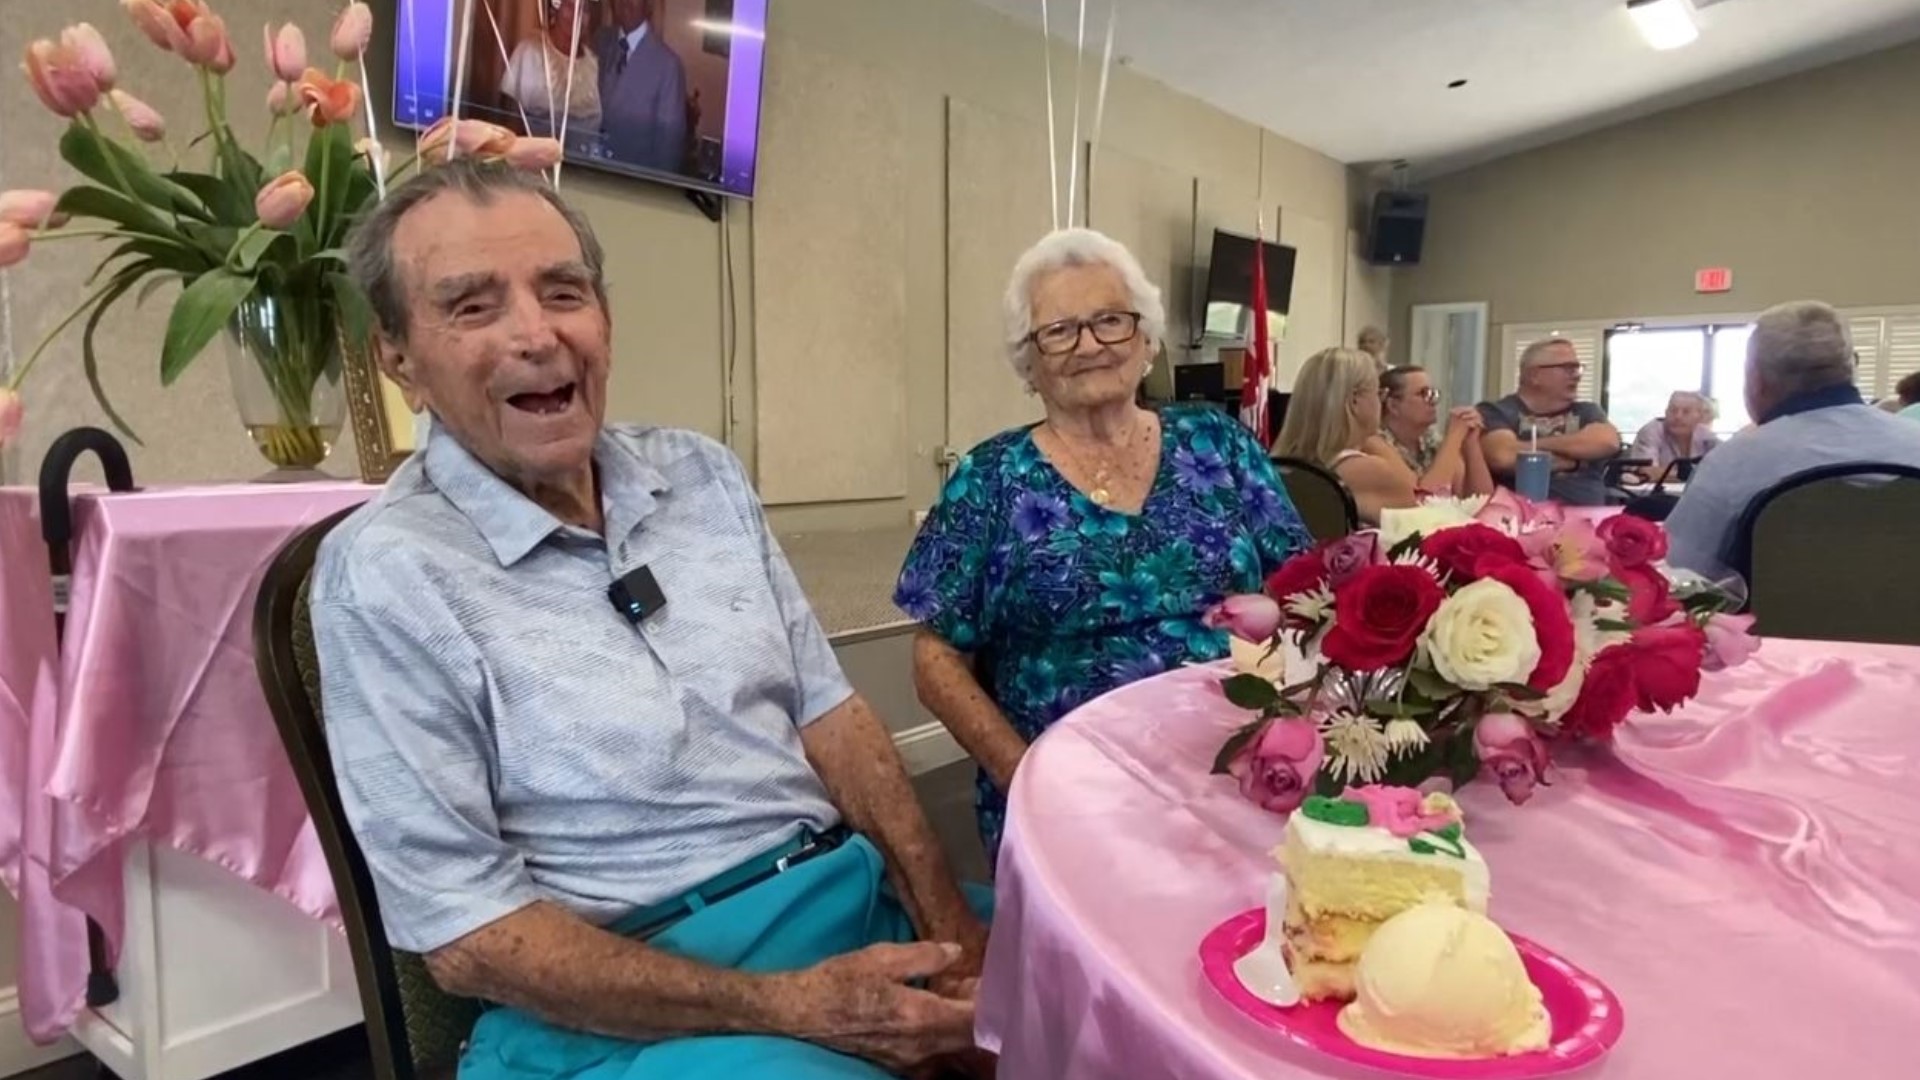 Vic and Marge, who are 101 and 98 respectively, have 13 grandchildren. They say the secret to a long life and marriage is eating right and having faith.